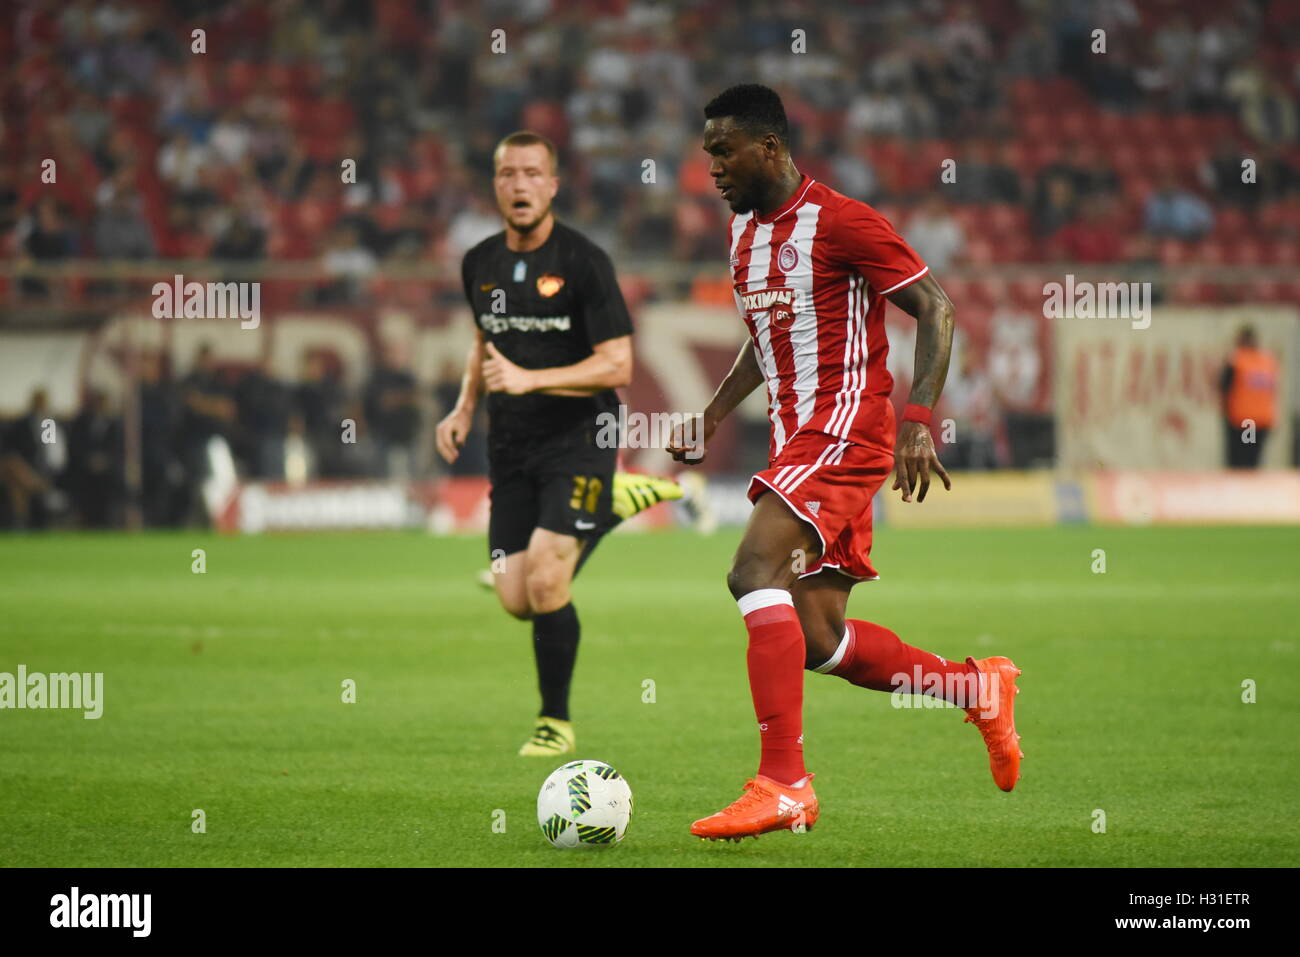 Athens, Greece. 02nd Oct, 2016. Brown Ideye (no 99) of Olympiacos attack  under the pressure of Jakob Johansson (no 18) of AEK. Triumph for  Olympiacos (red) football team, who manage to win